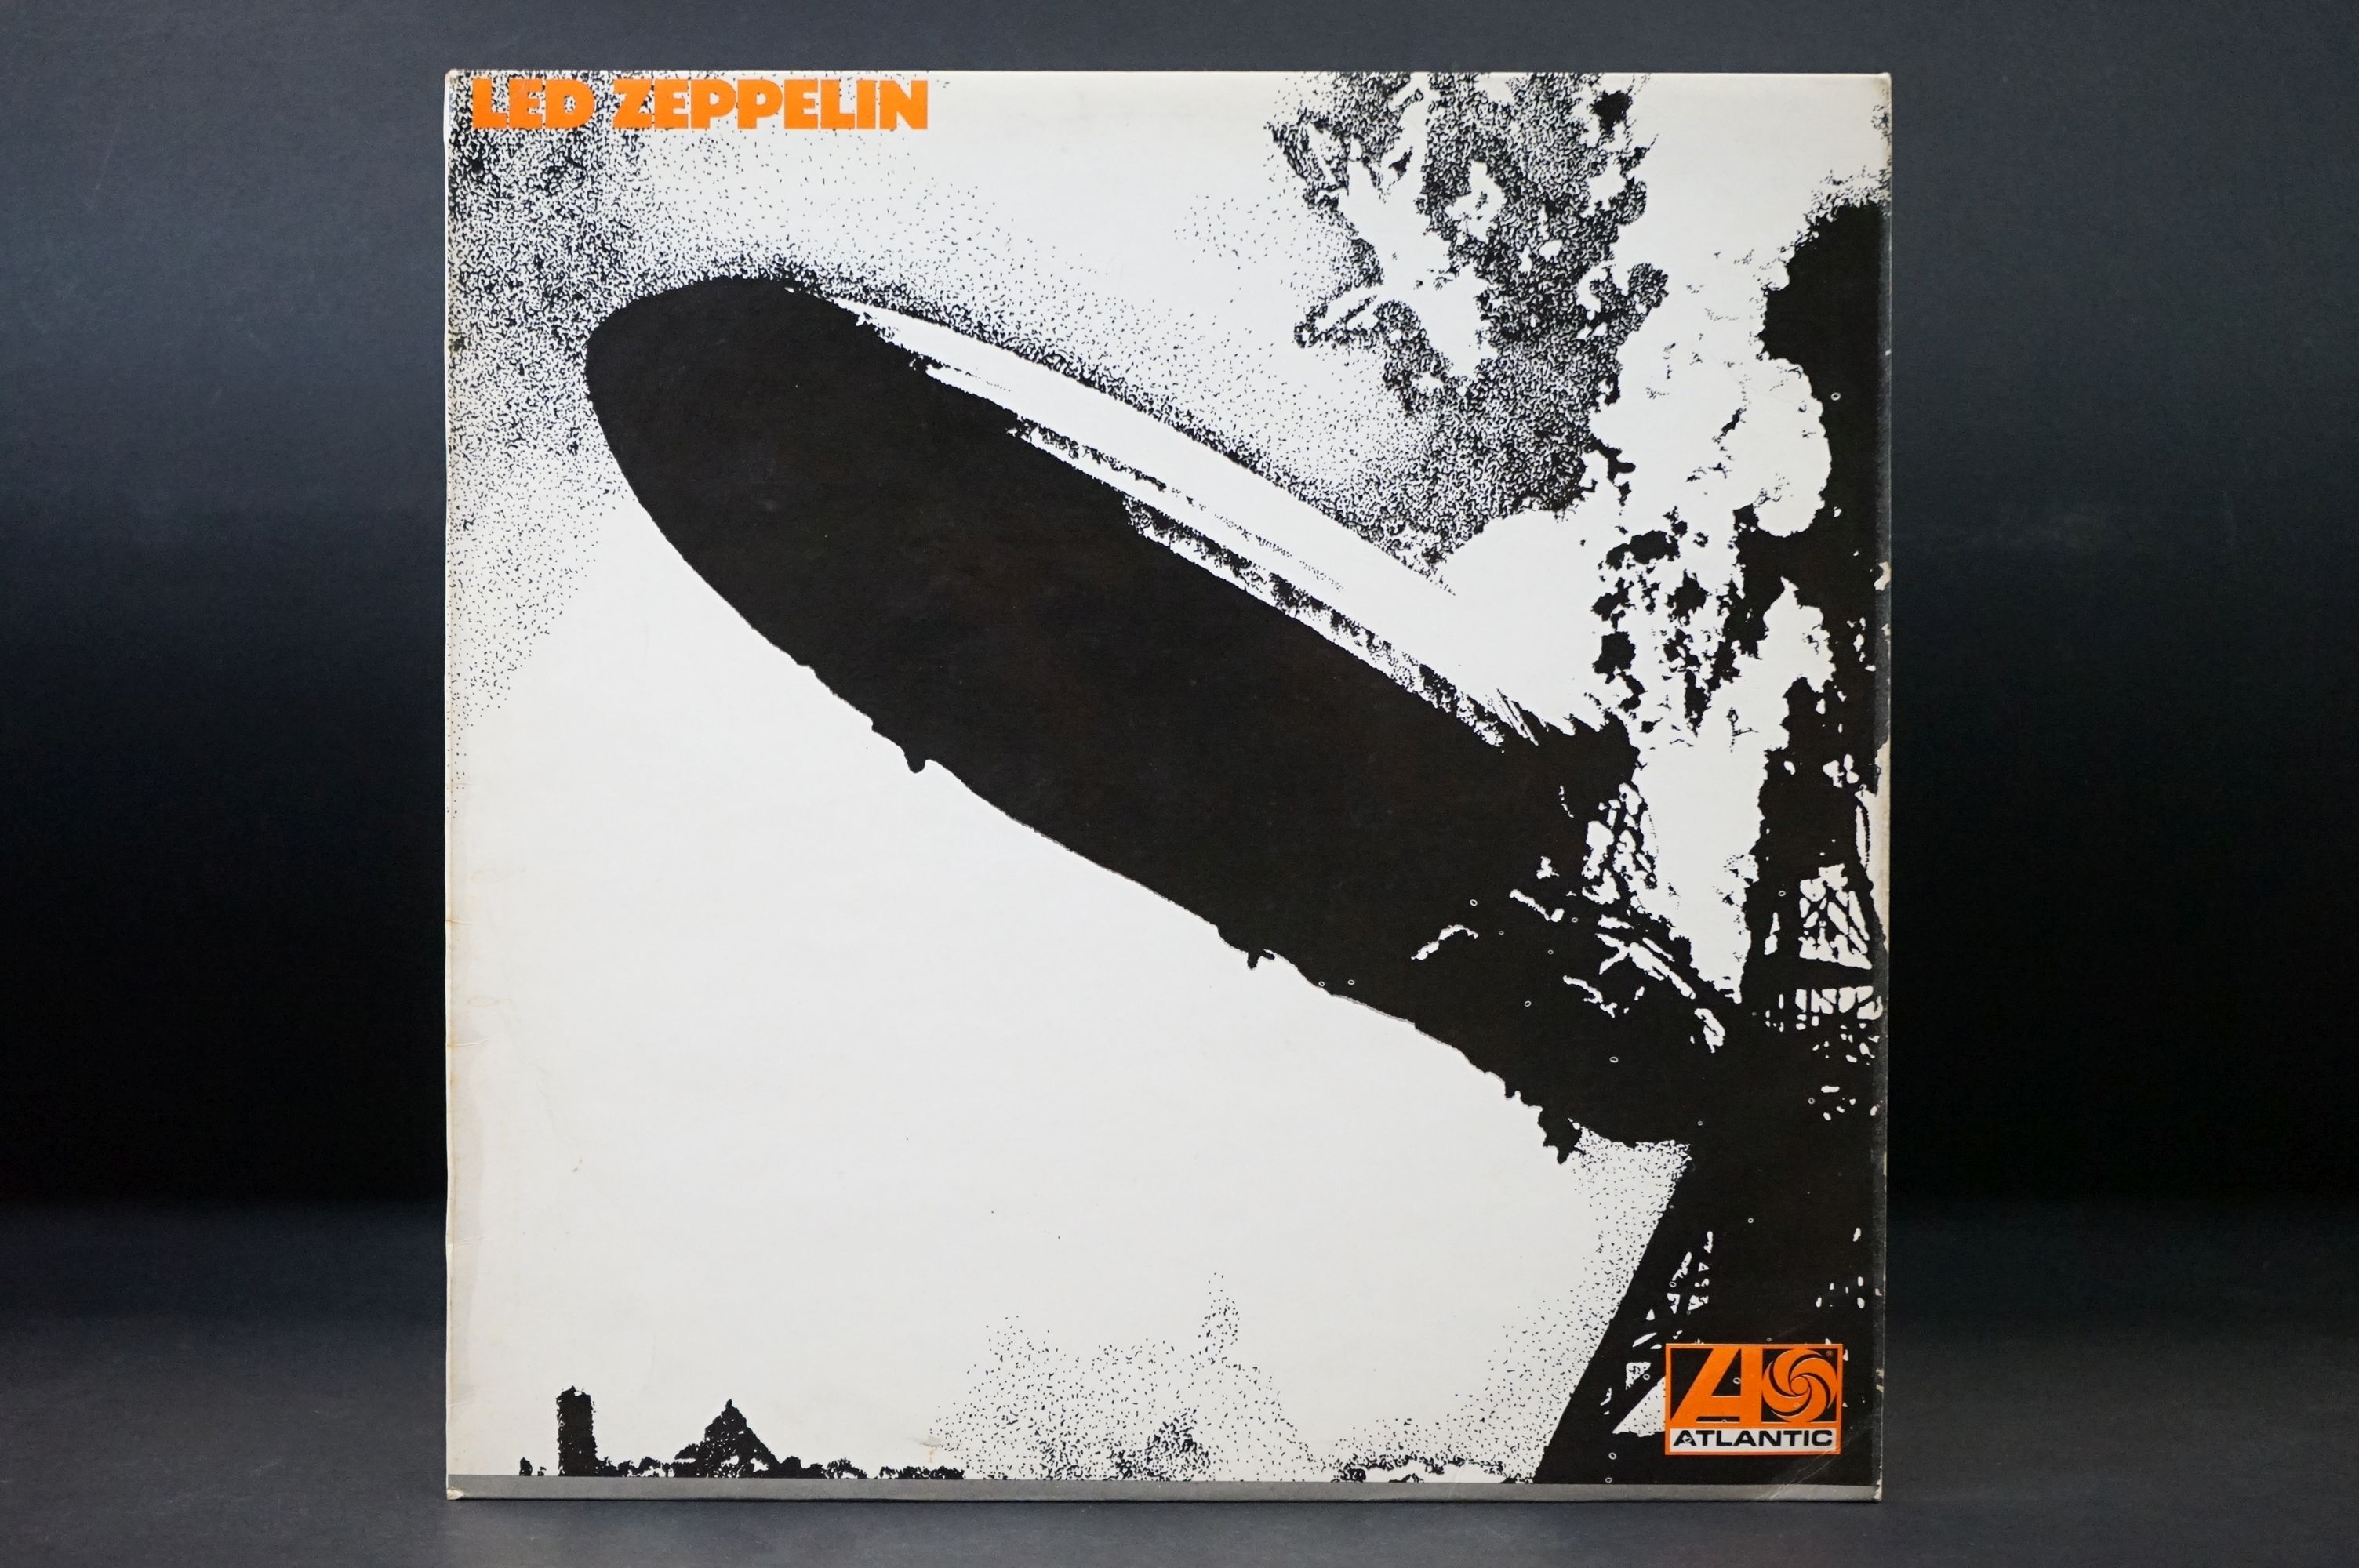 Vinyl - Led Zeppelin self titled. Original UK 2nd pressing with plum labels, this variation with